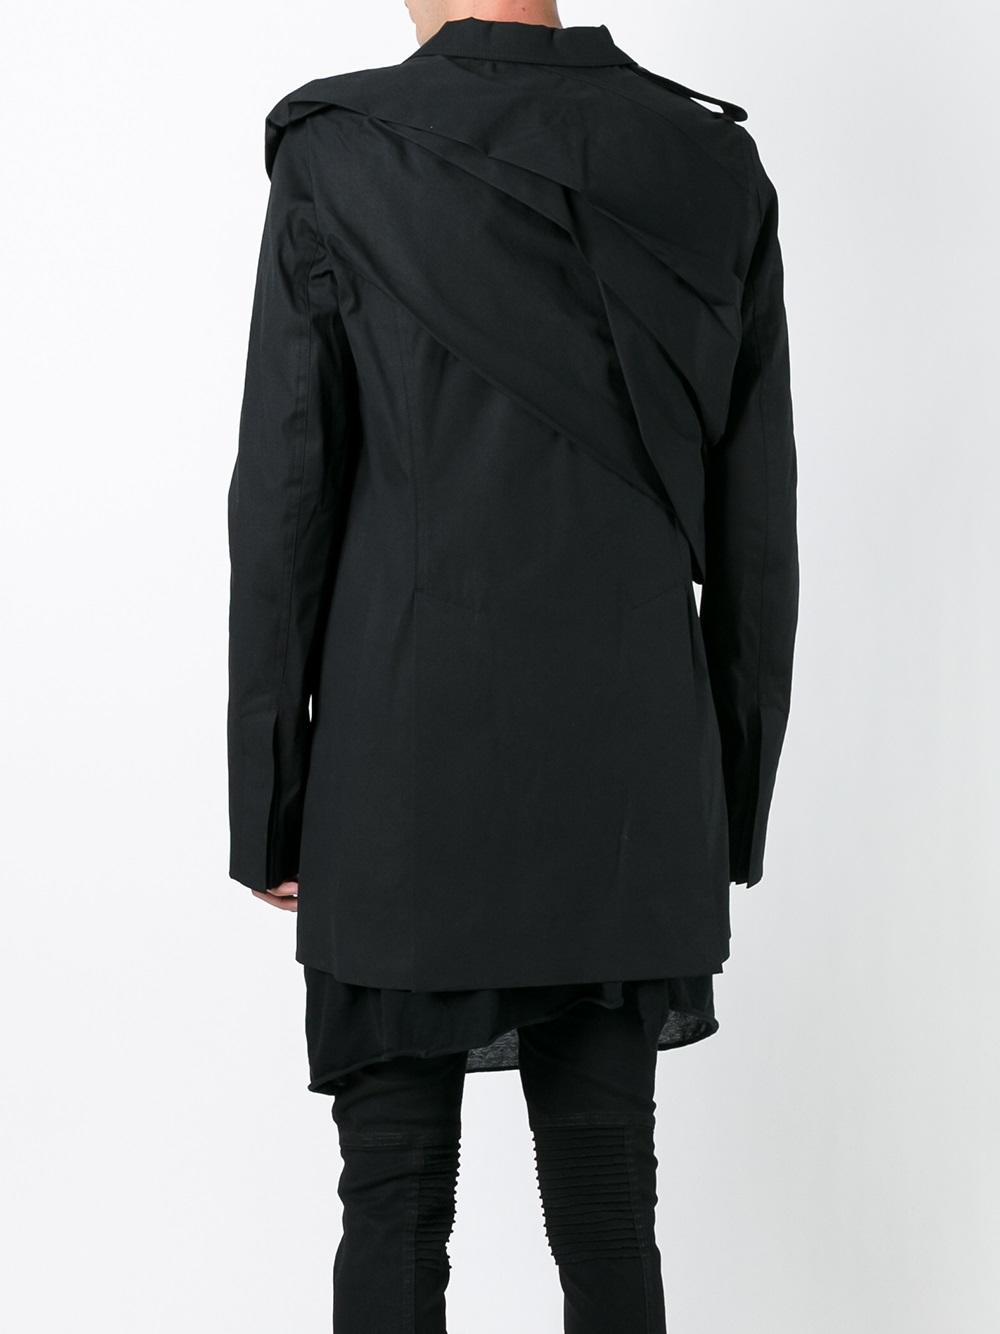 Lyst - Rick Owens 'pea' Trench Coat in Black for Men